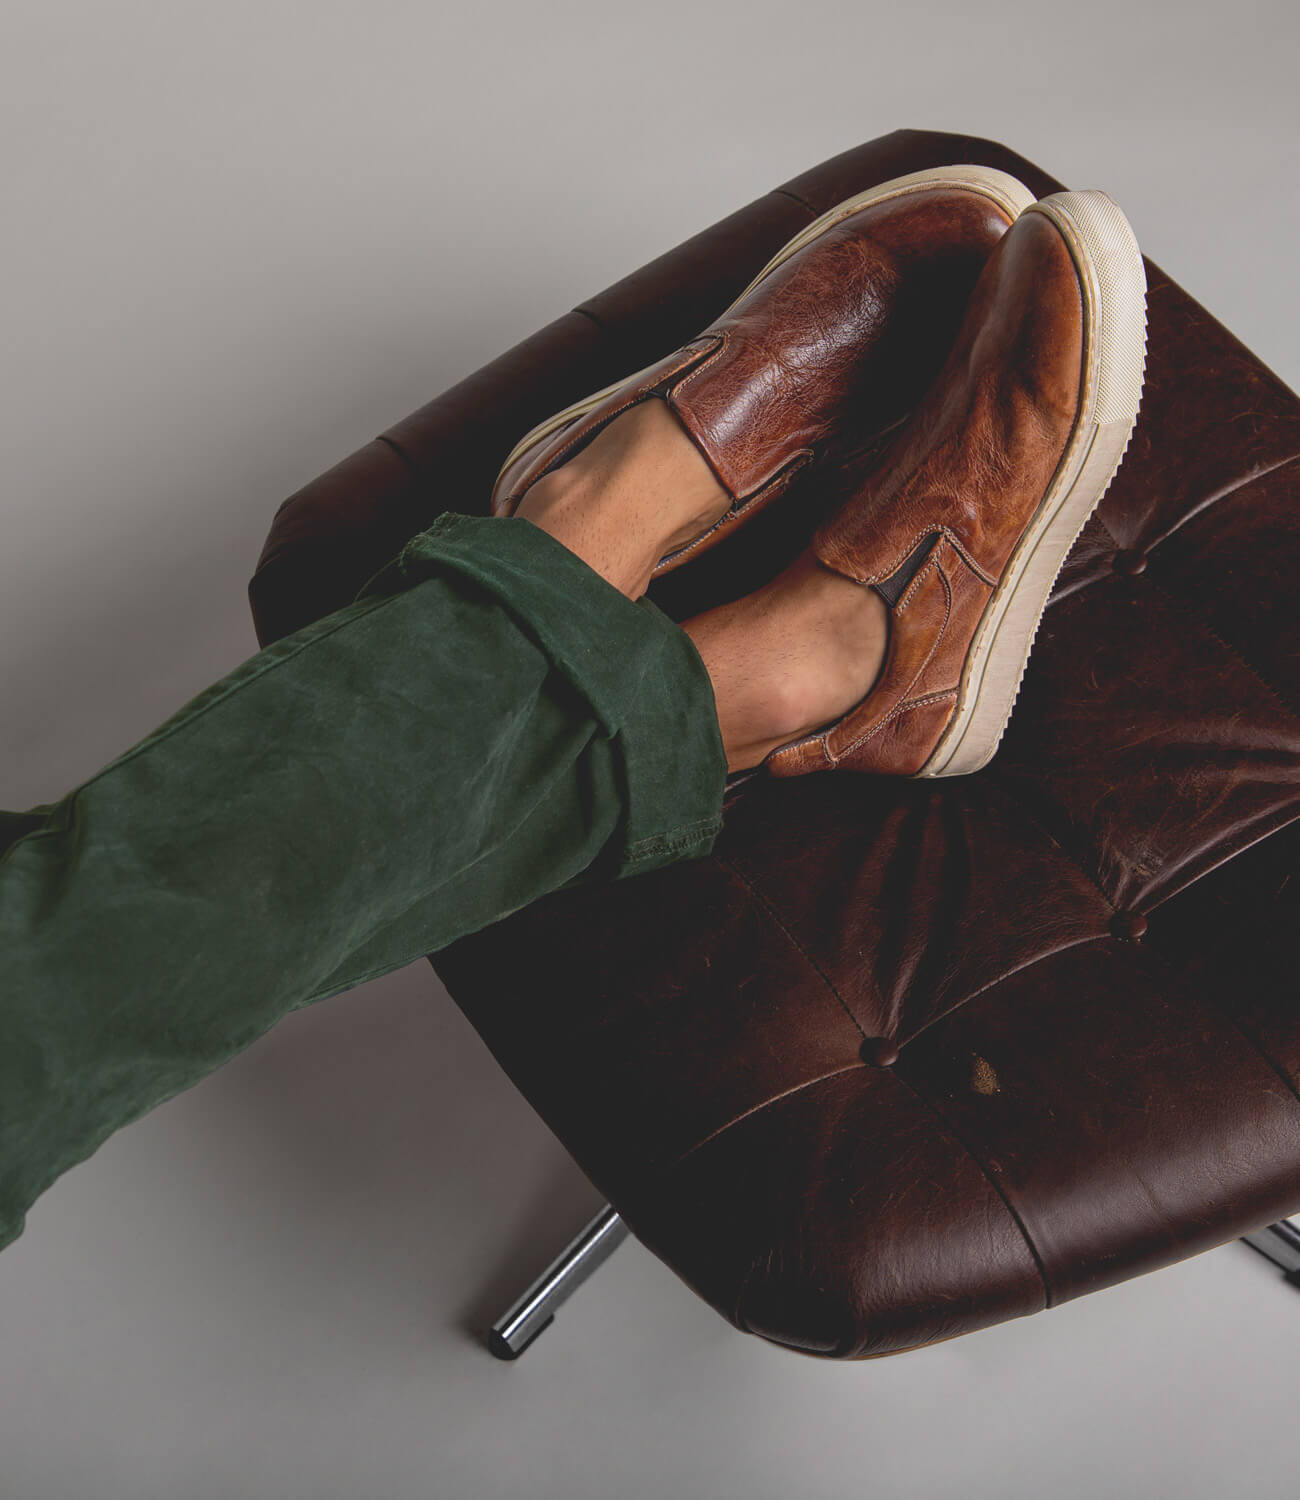 A person's feet sitting on a Harry leather chair.